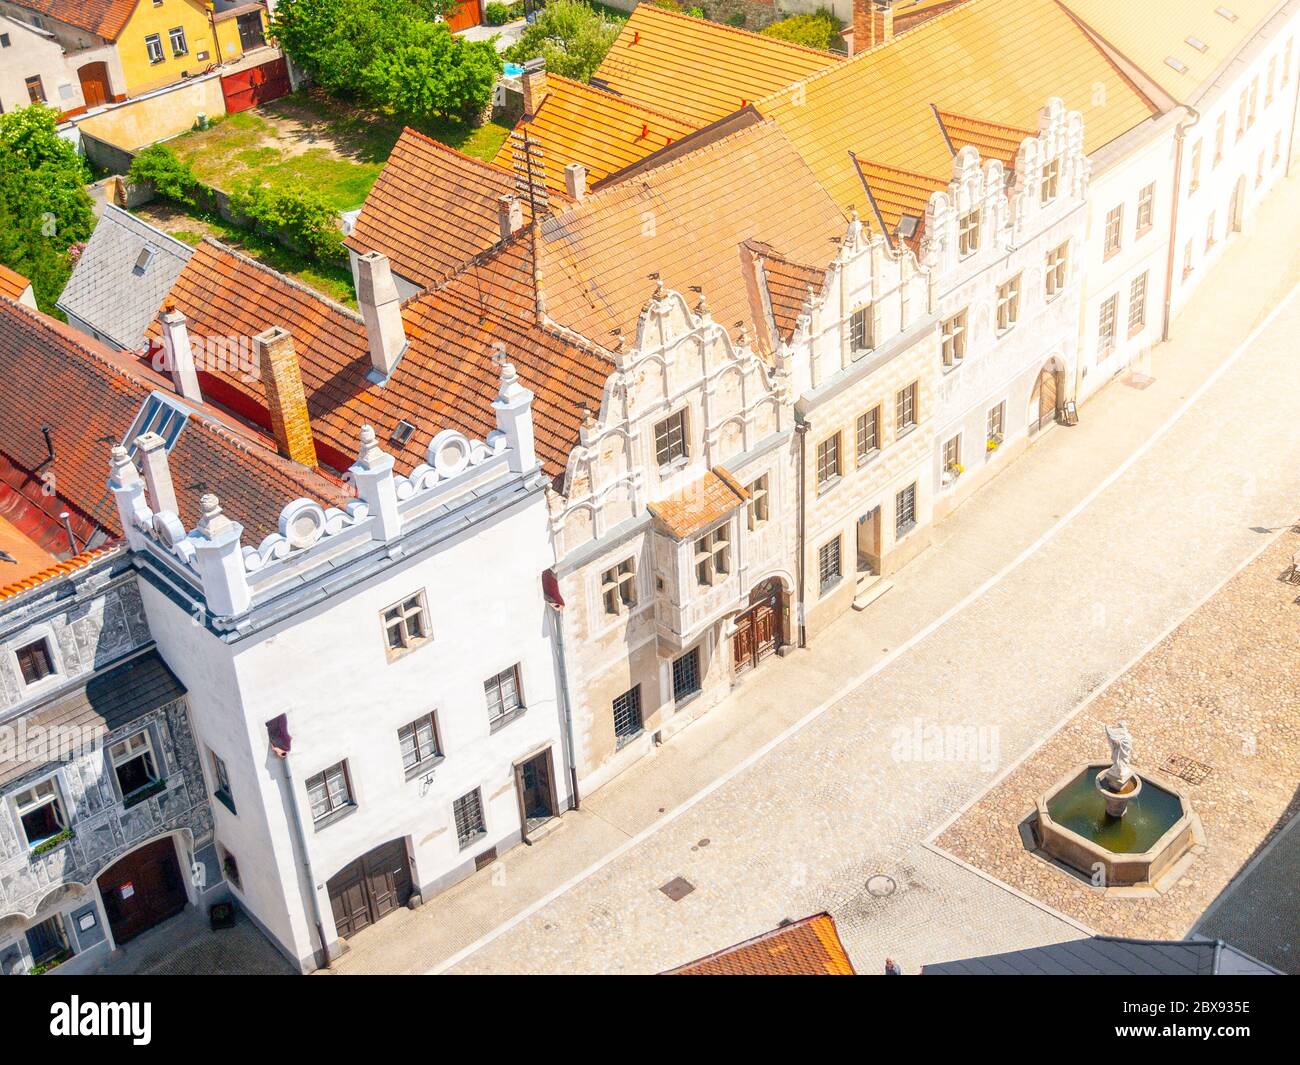 Aerial view of Renaissance houses in Slavonice, Czech Republic. Stock Photo